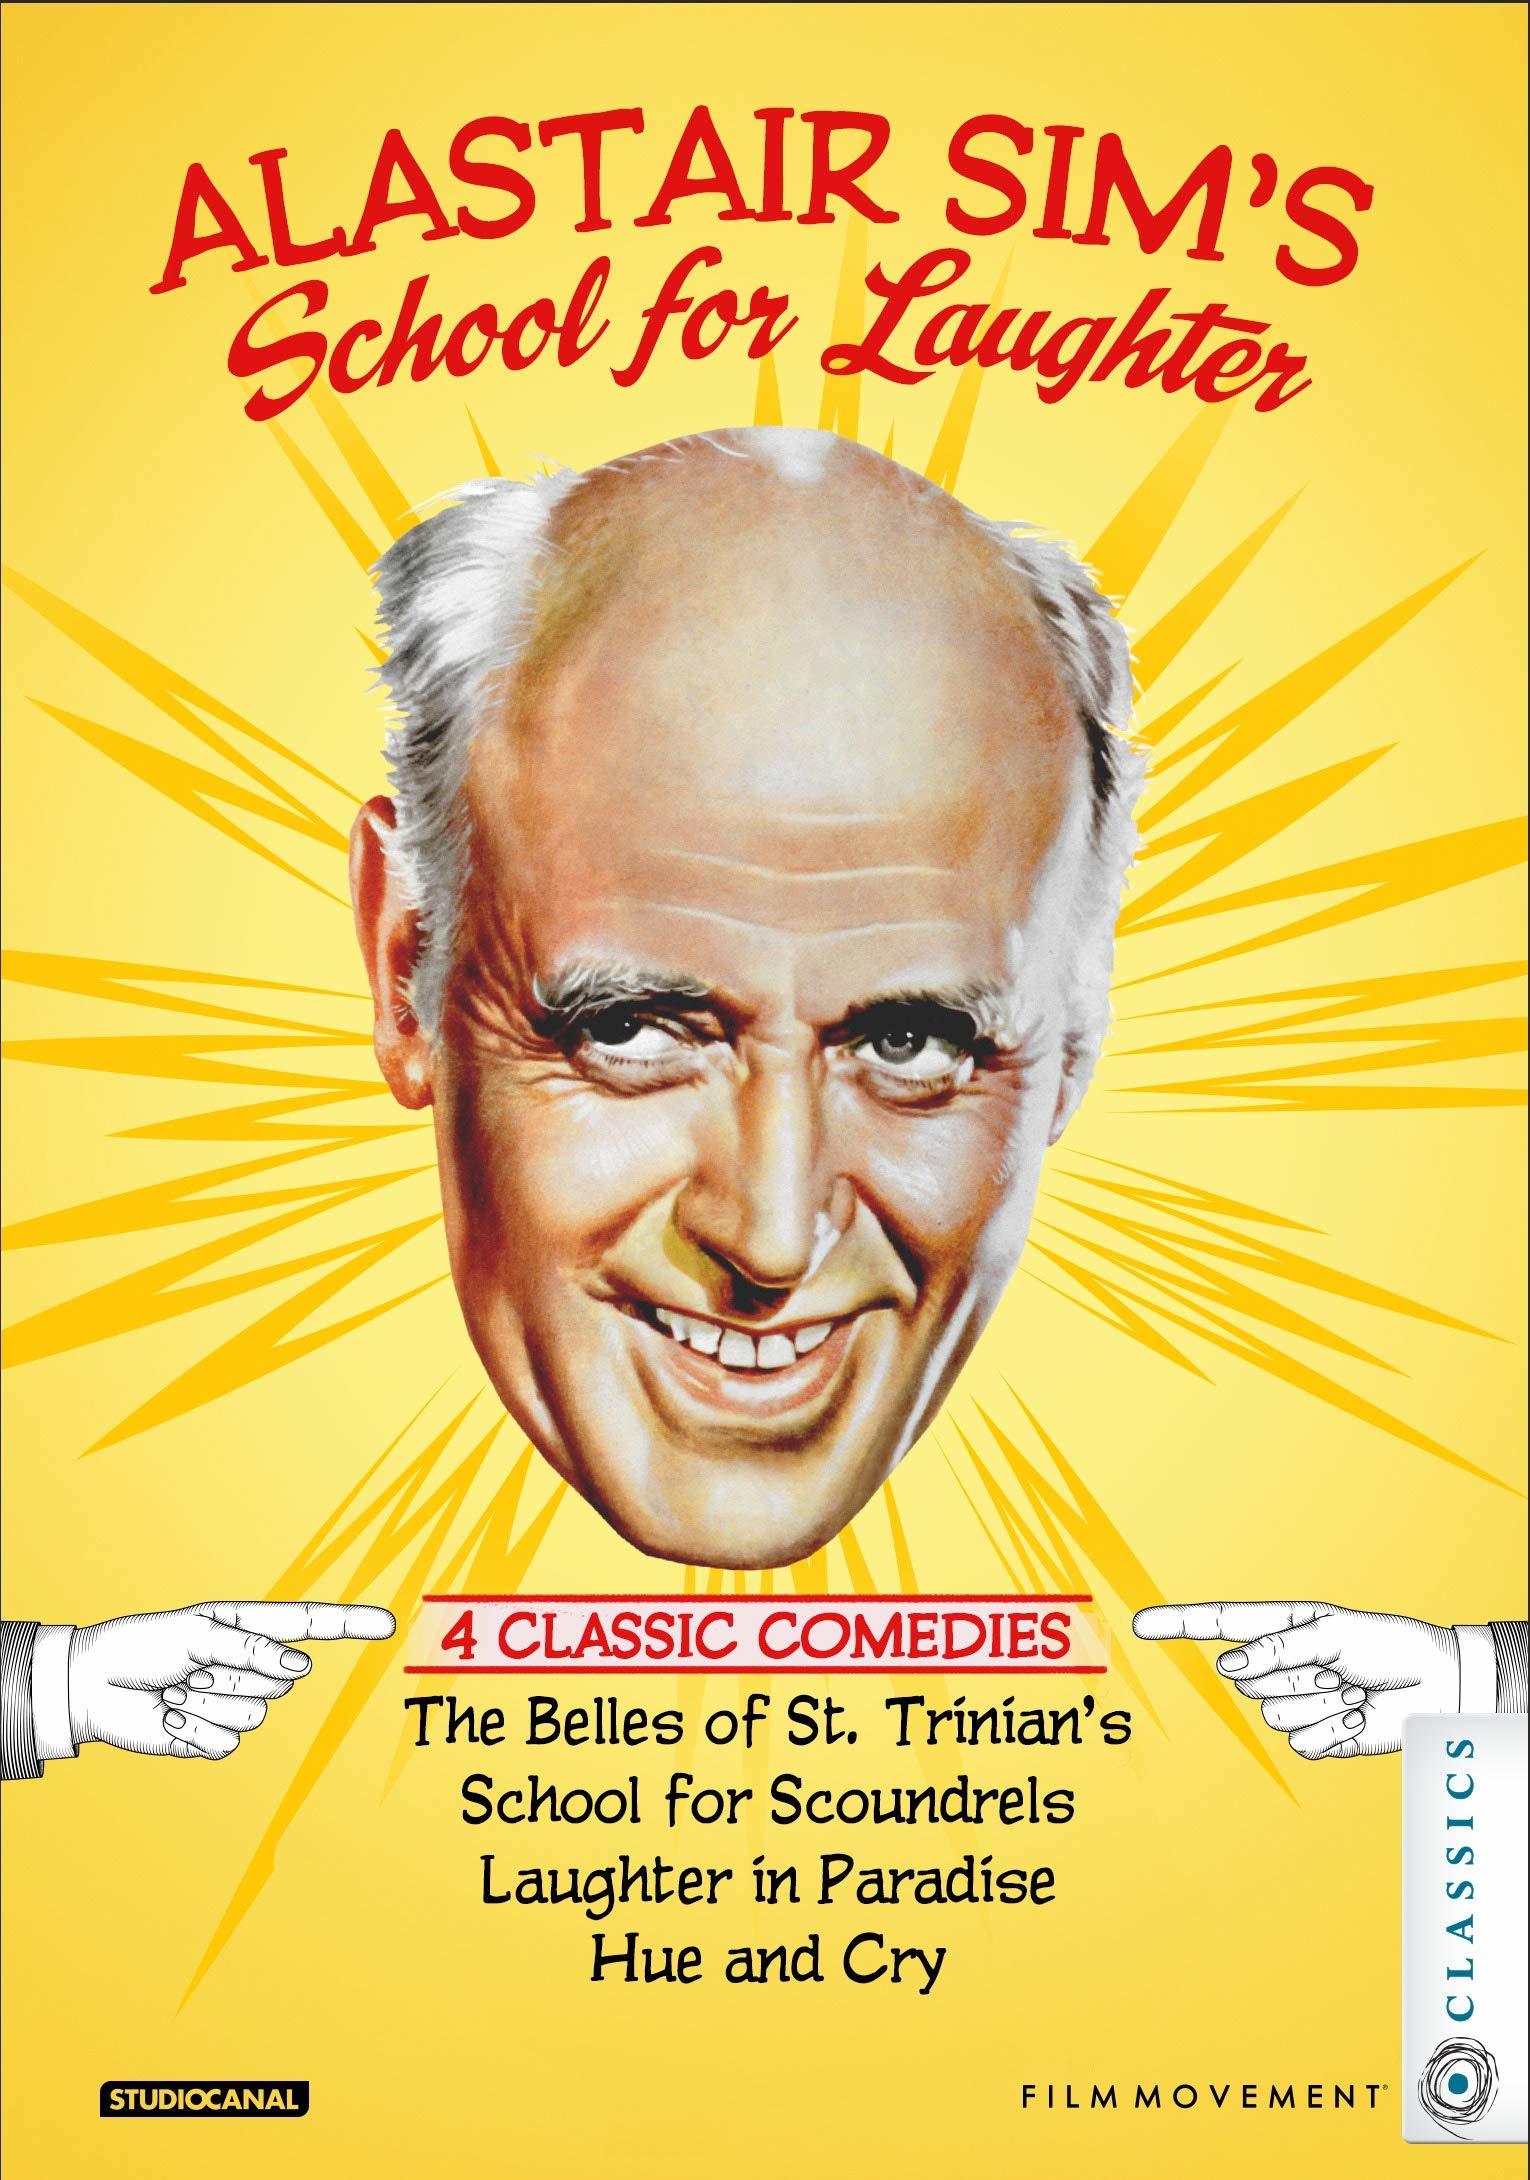 ALASTAIR SIM'S SCHOOL FOR LAUGHTER BLU-RAY